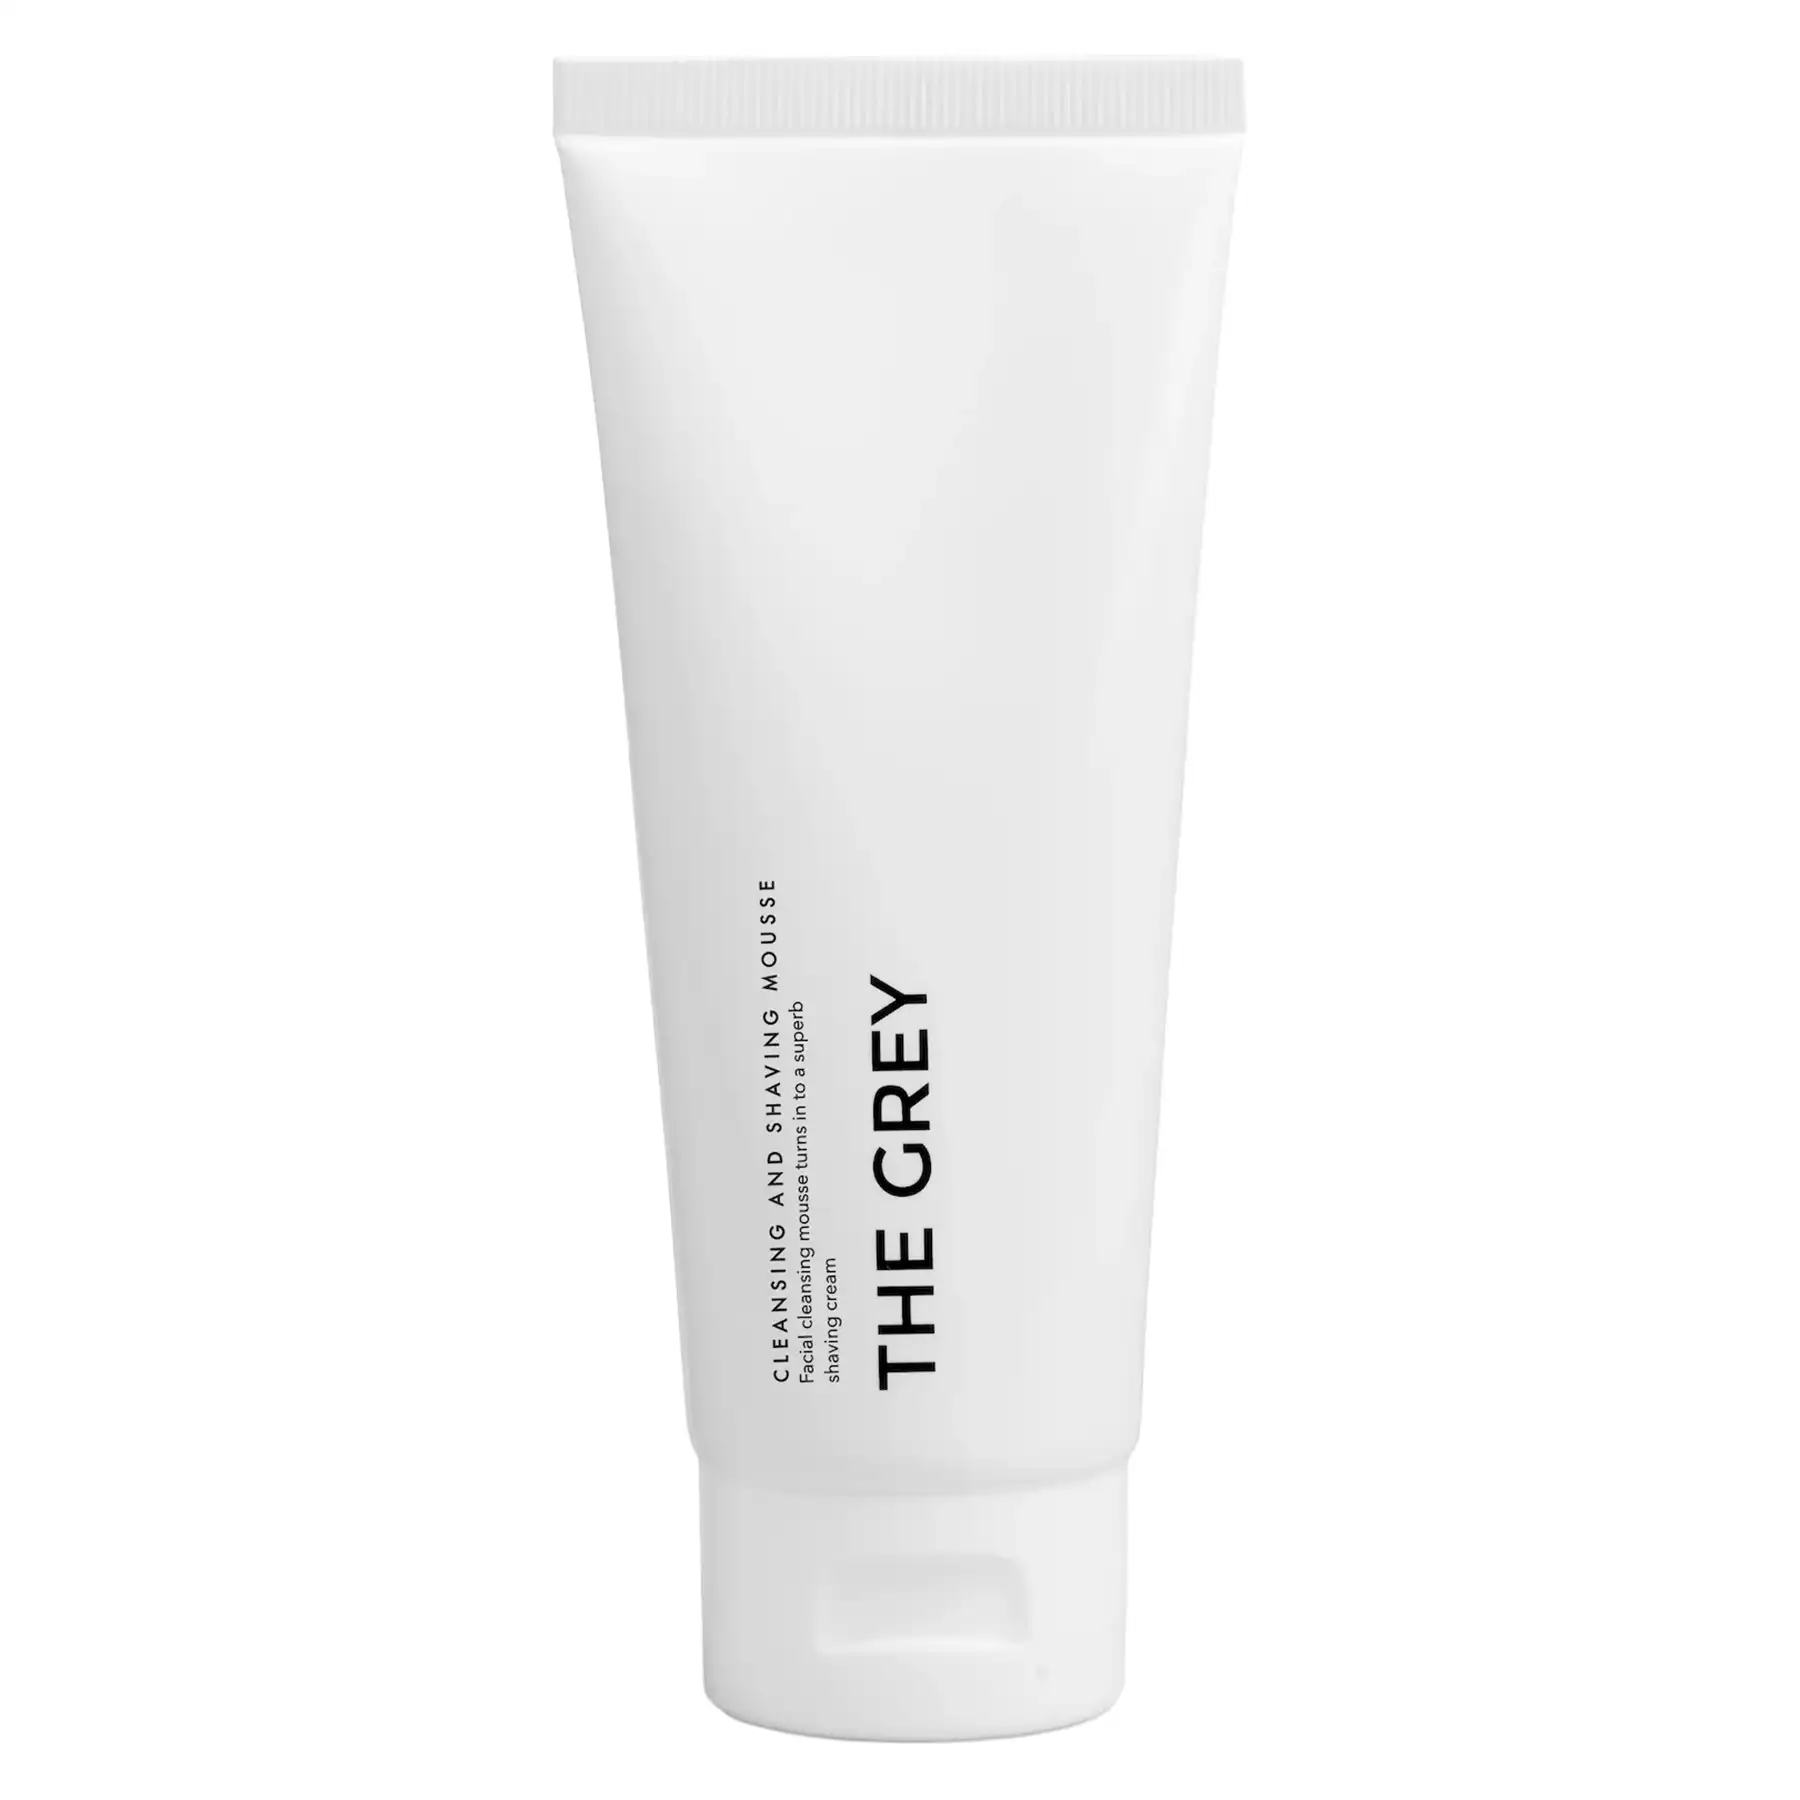 The Grey Men's Skin Care Cleansing and Shaving Mousse